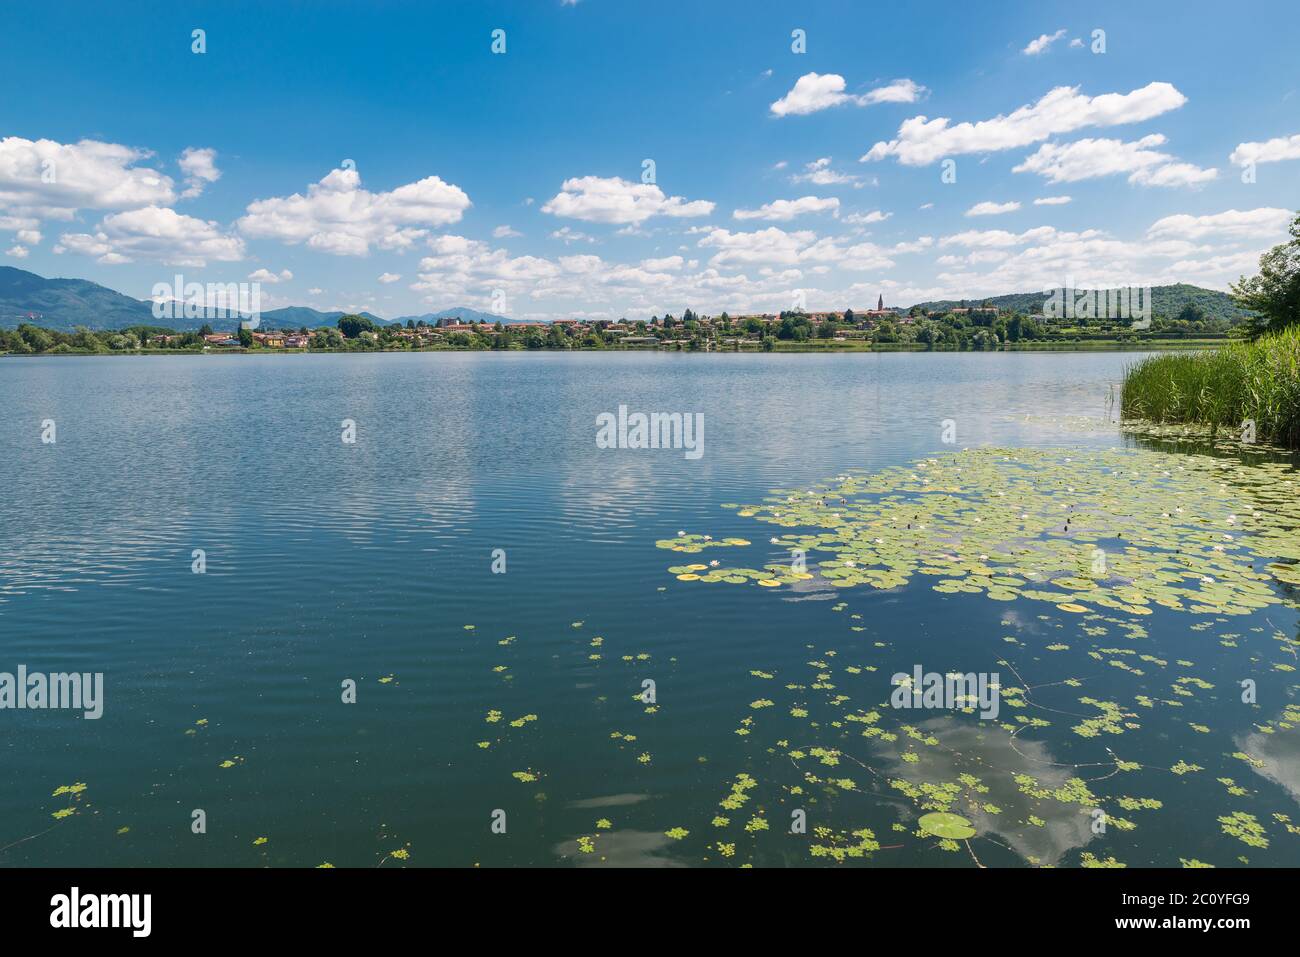 Typical vegetation of a European lake with water lily plants . Lake Comabbio, Italy Stock Photo